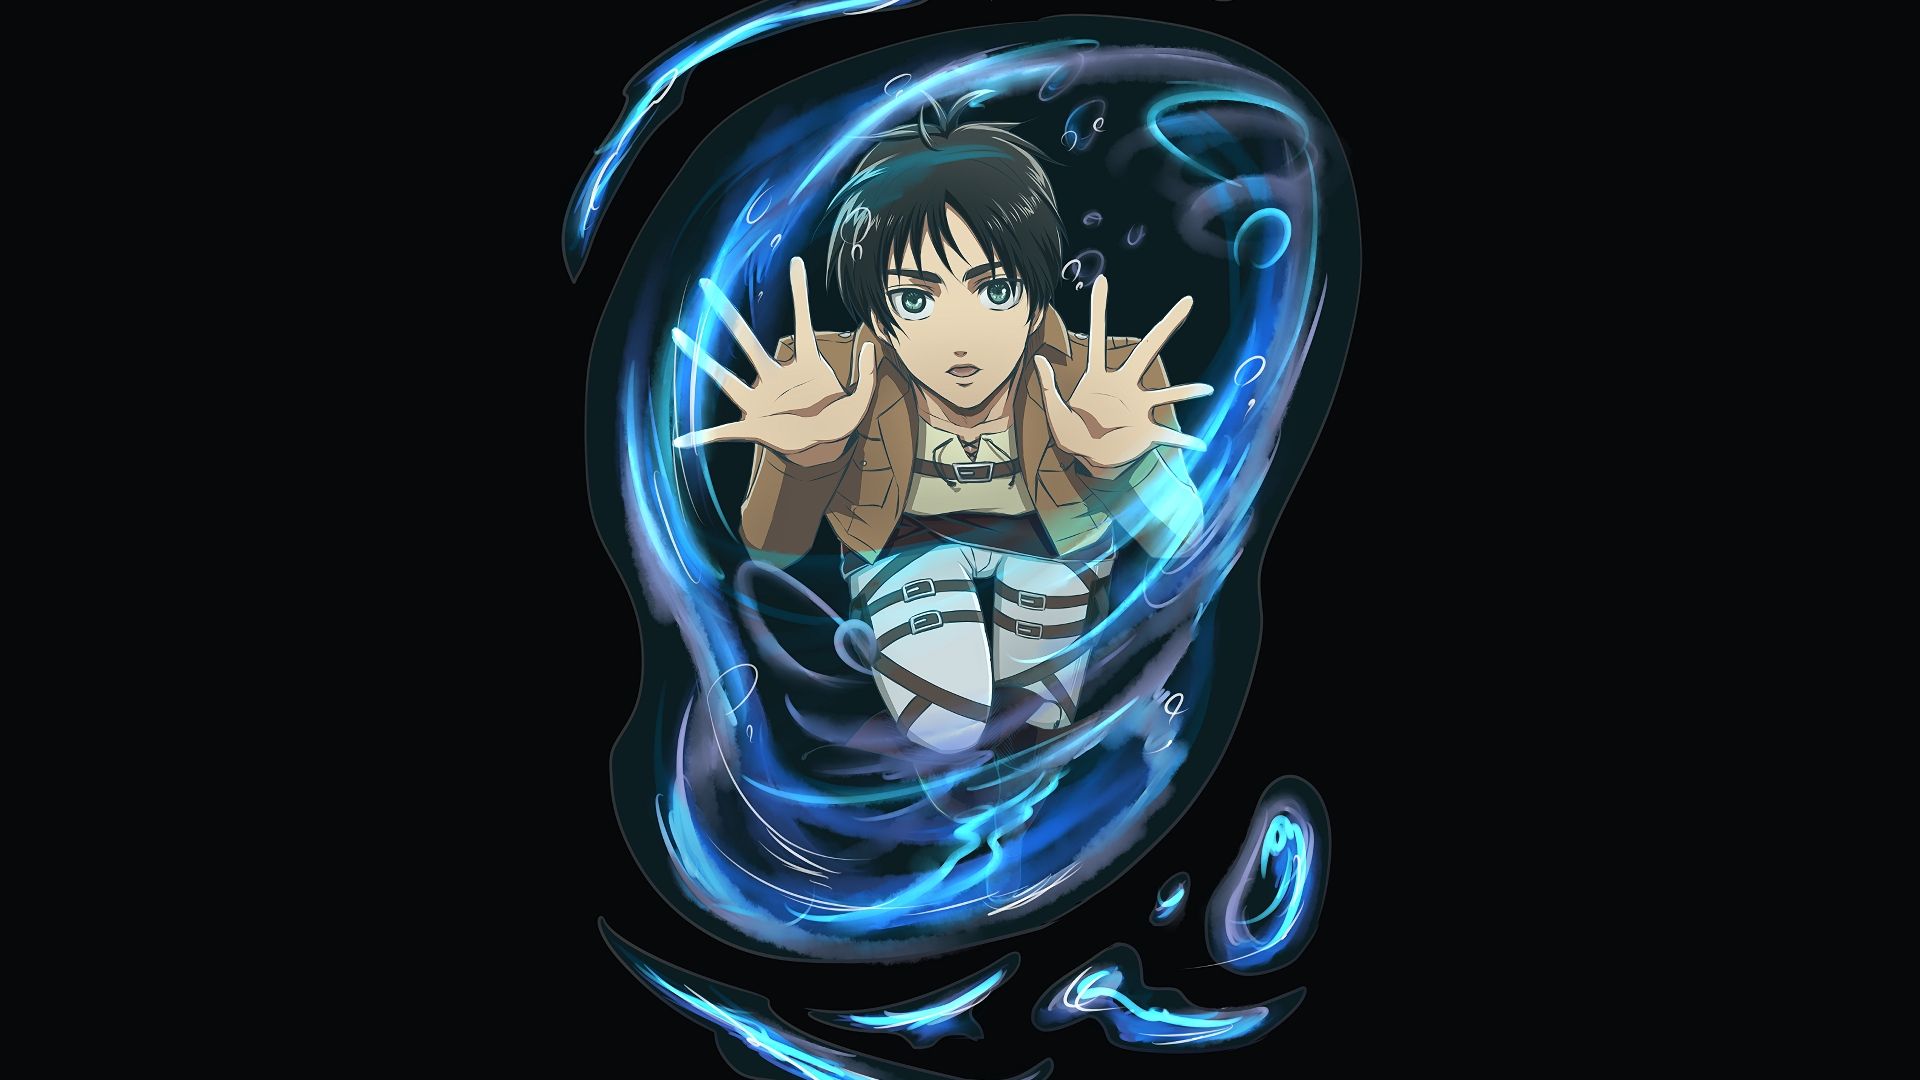 Wallpaper Eren Yeager into water bubble, anime boy